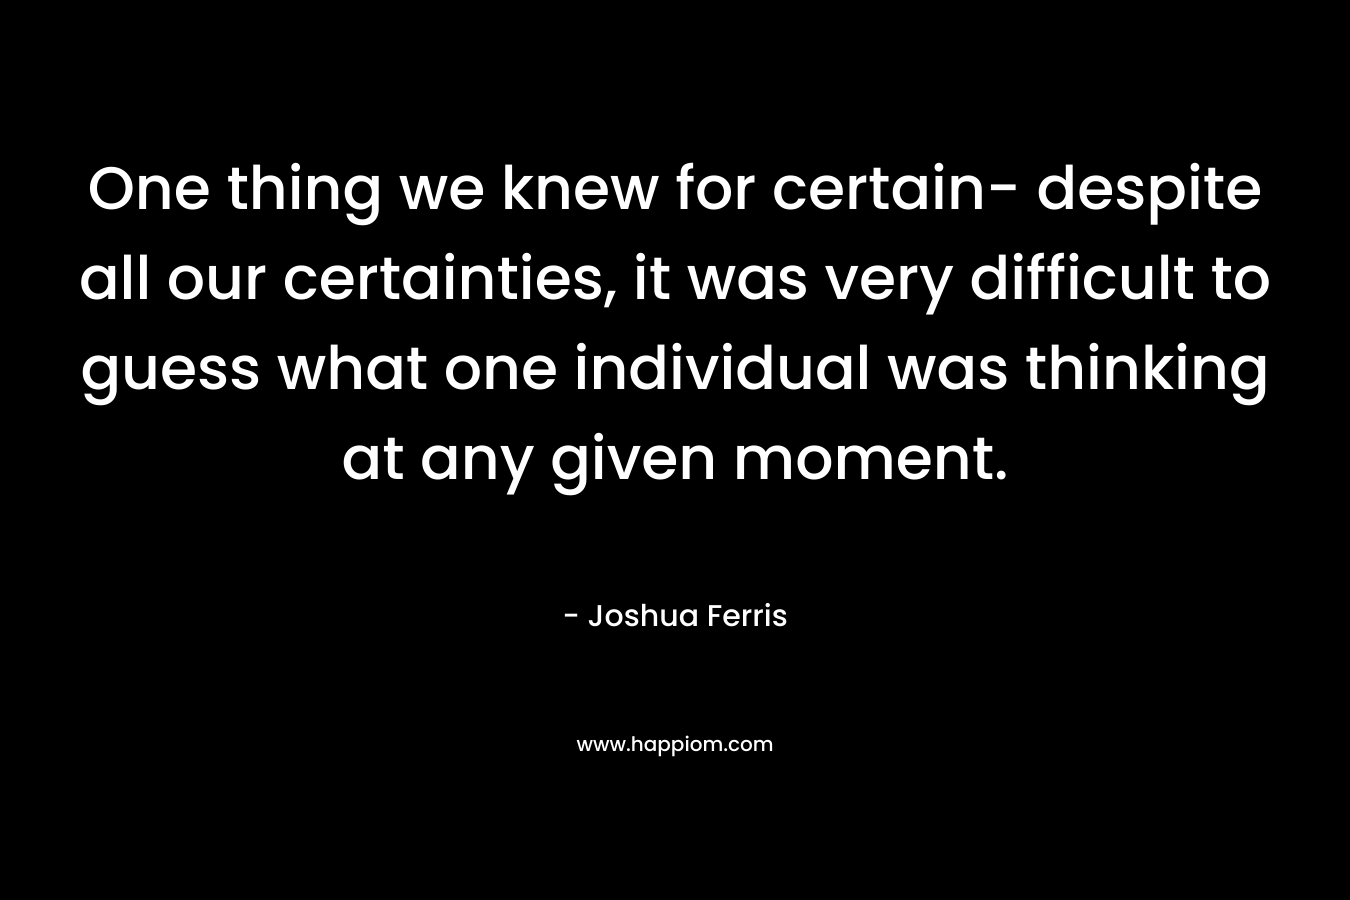 One thing we knew for certain- despite all our certainties, it was very difficult to guess what one individual was thinking at any given moment. – Joshua Ferris